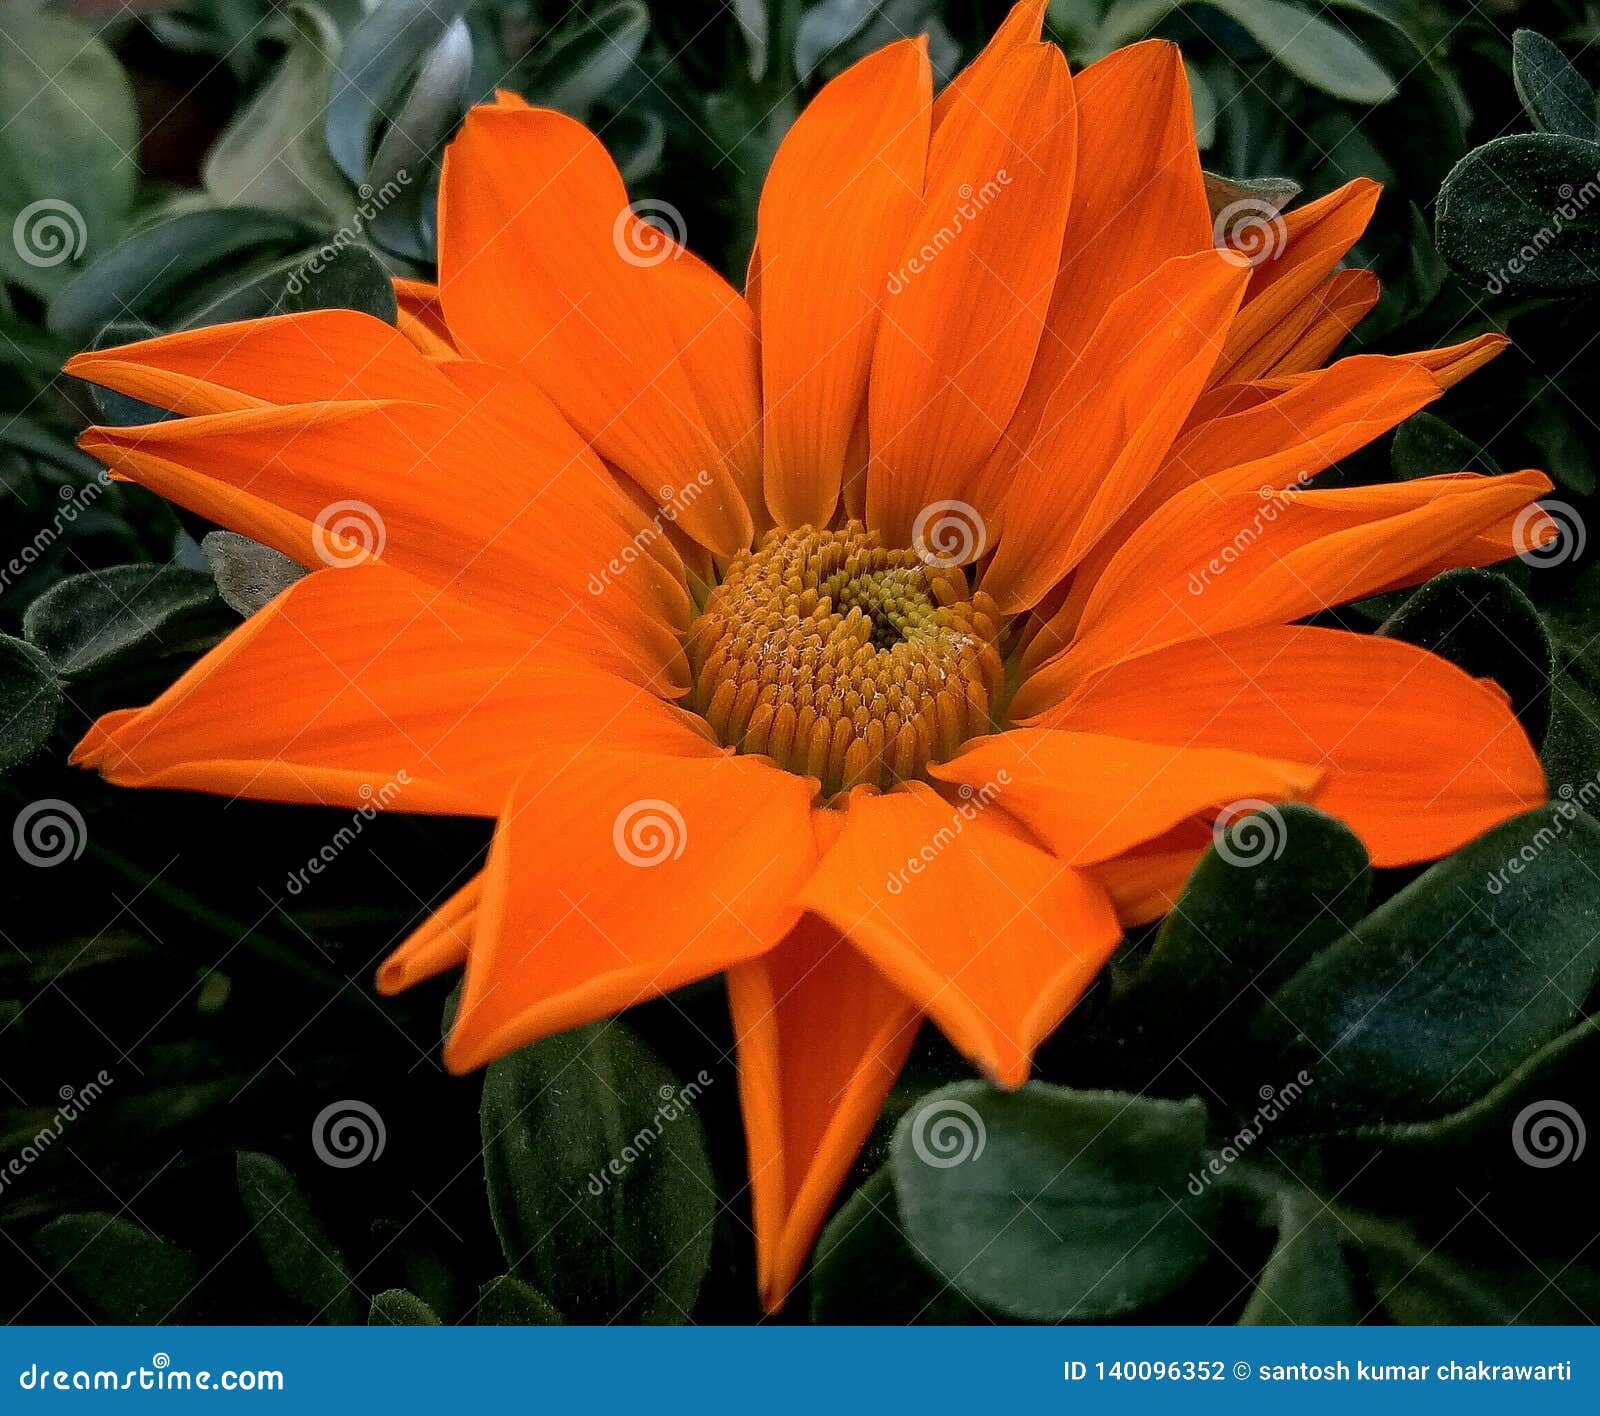 33 Guldaudi Flowers Photos Free Royalty Free Stock Photos From Dreamstime